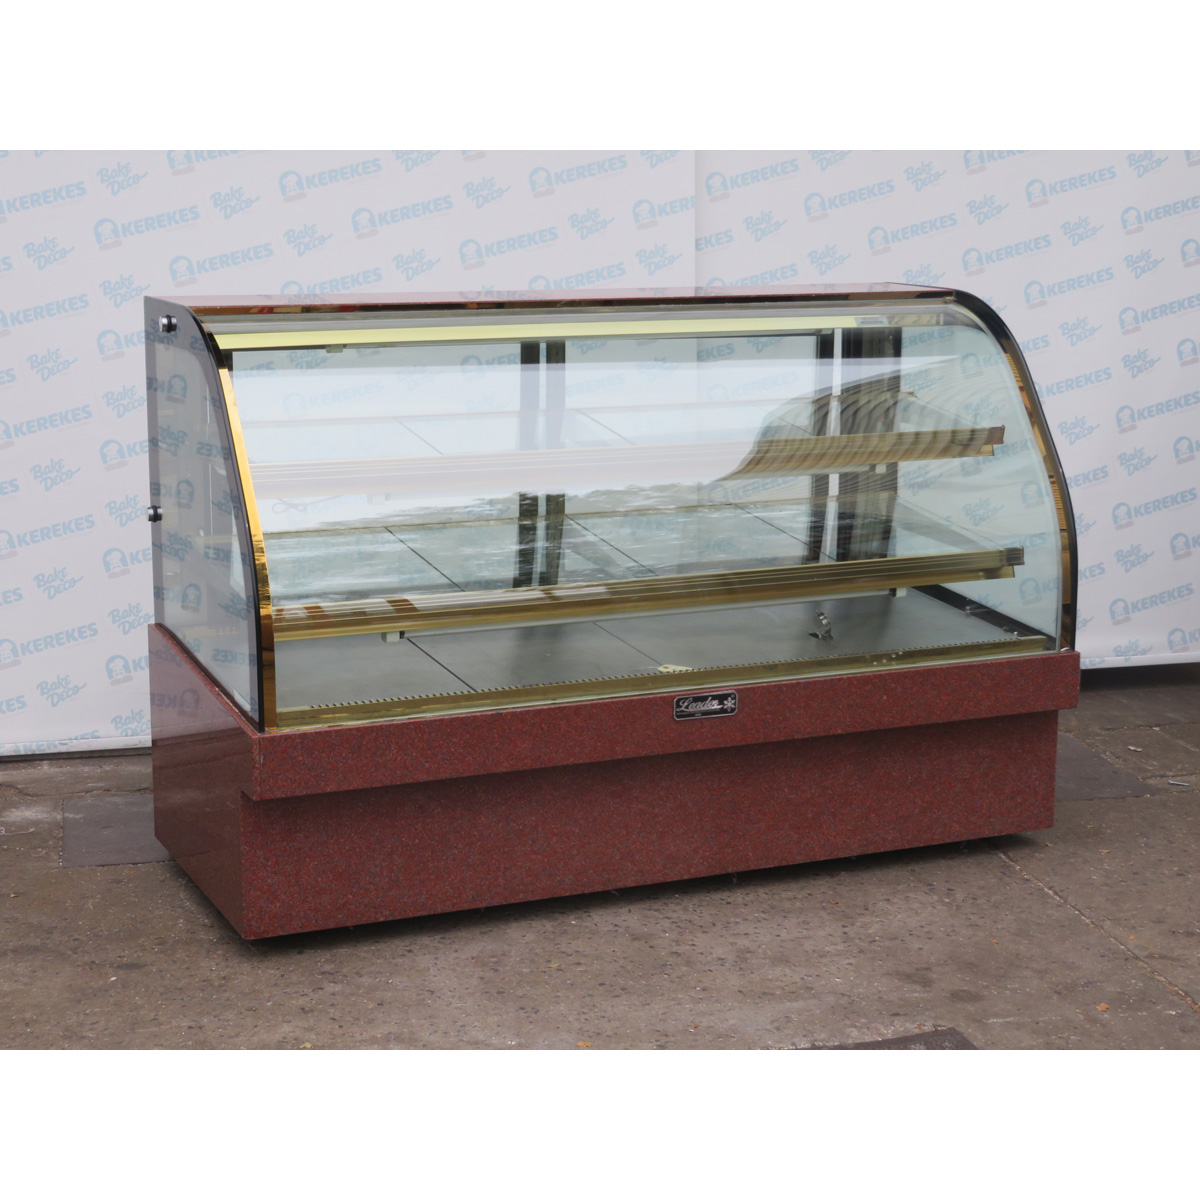 Leader MCB77SC Refrigerated Bakery Display Case, Used Excellent Condition